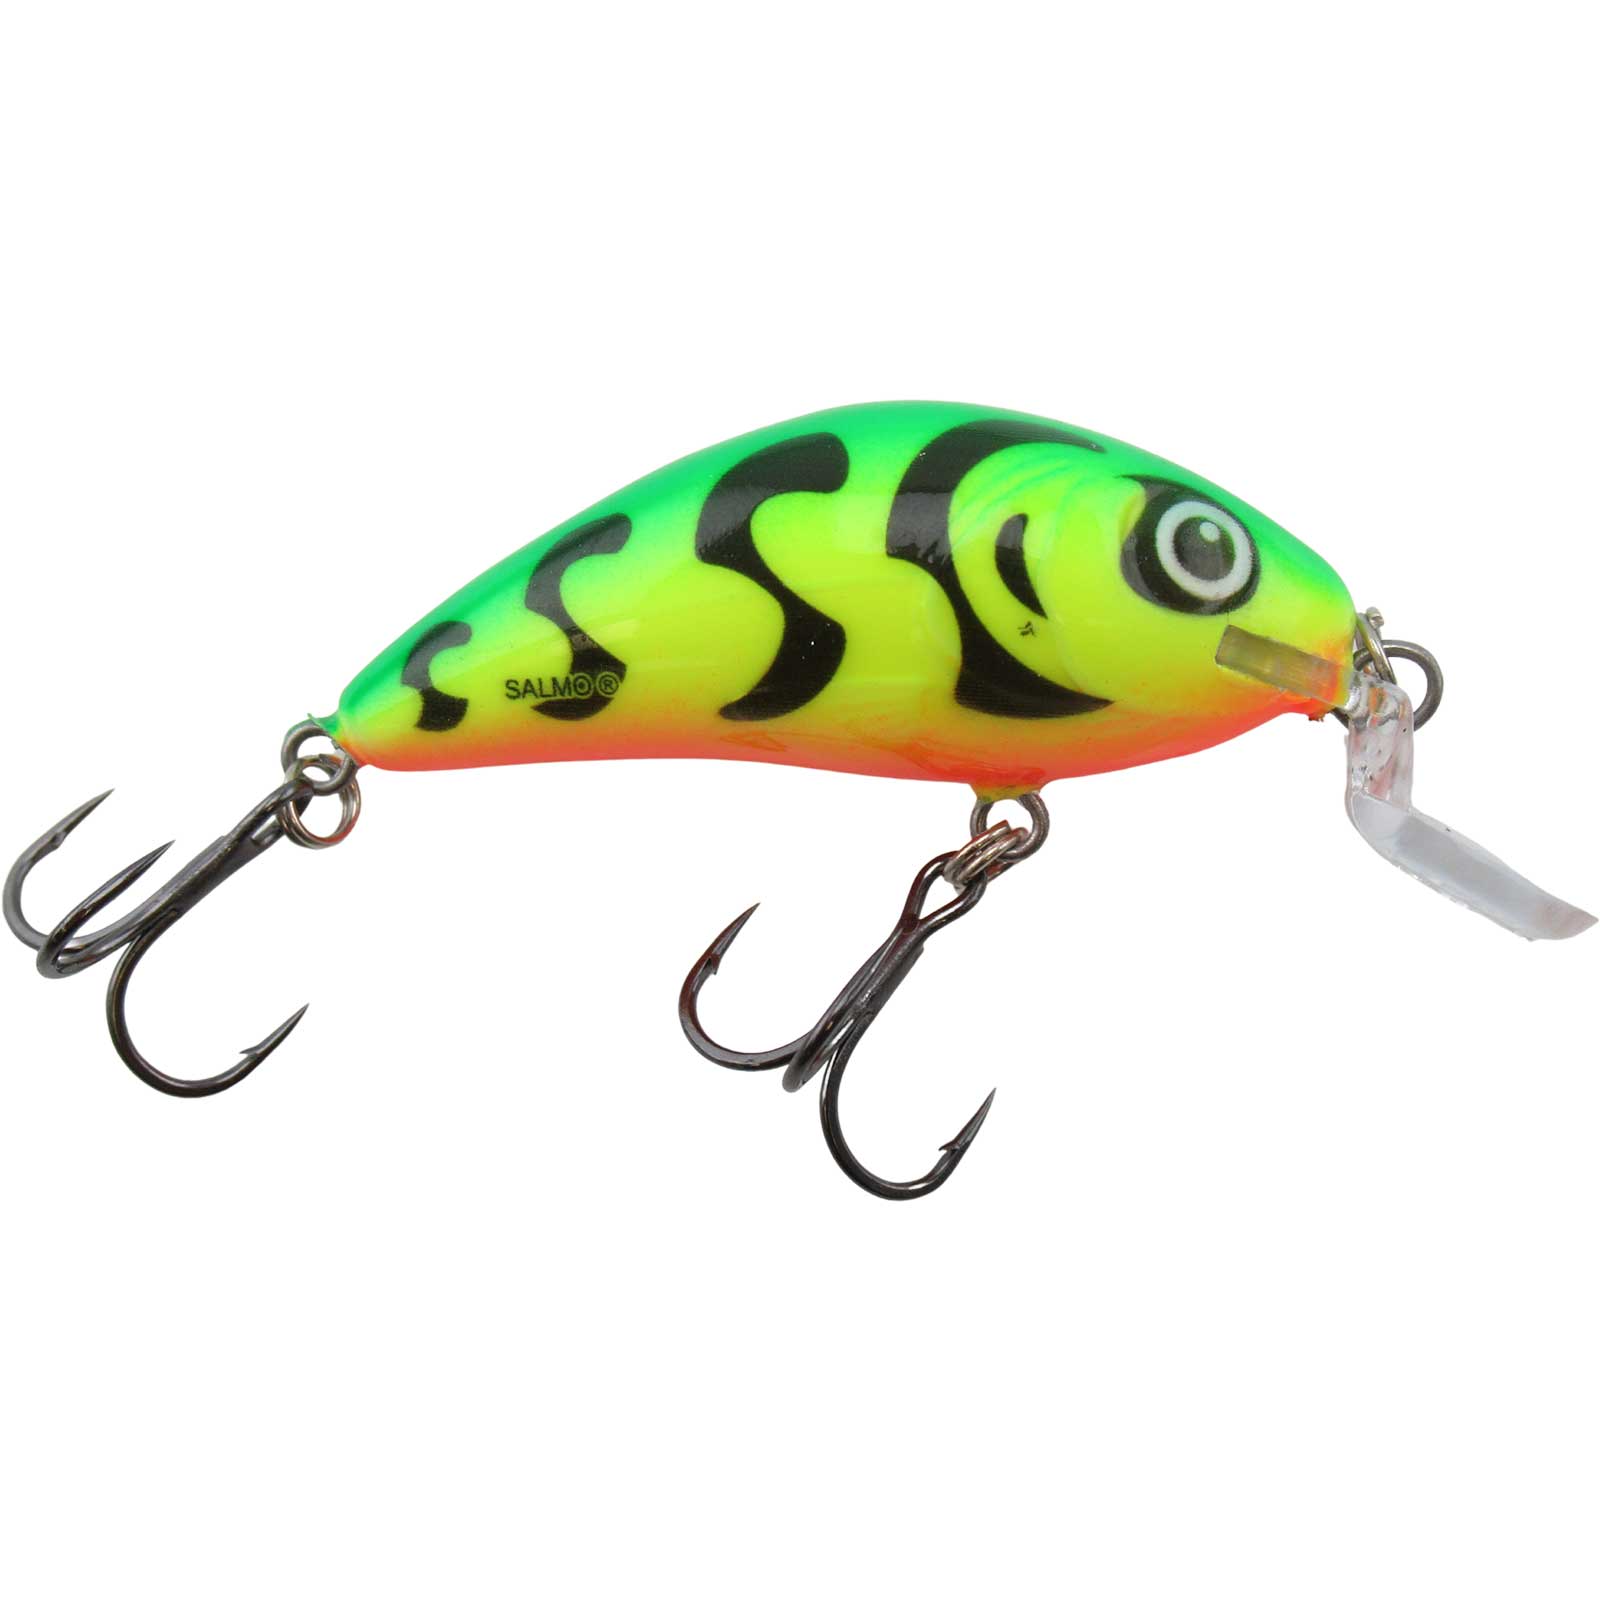 6 NEW Joint Shallow Diving Fishing Crankbait Lures 4 Red Green Gold